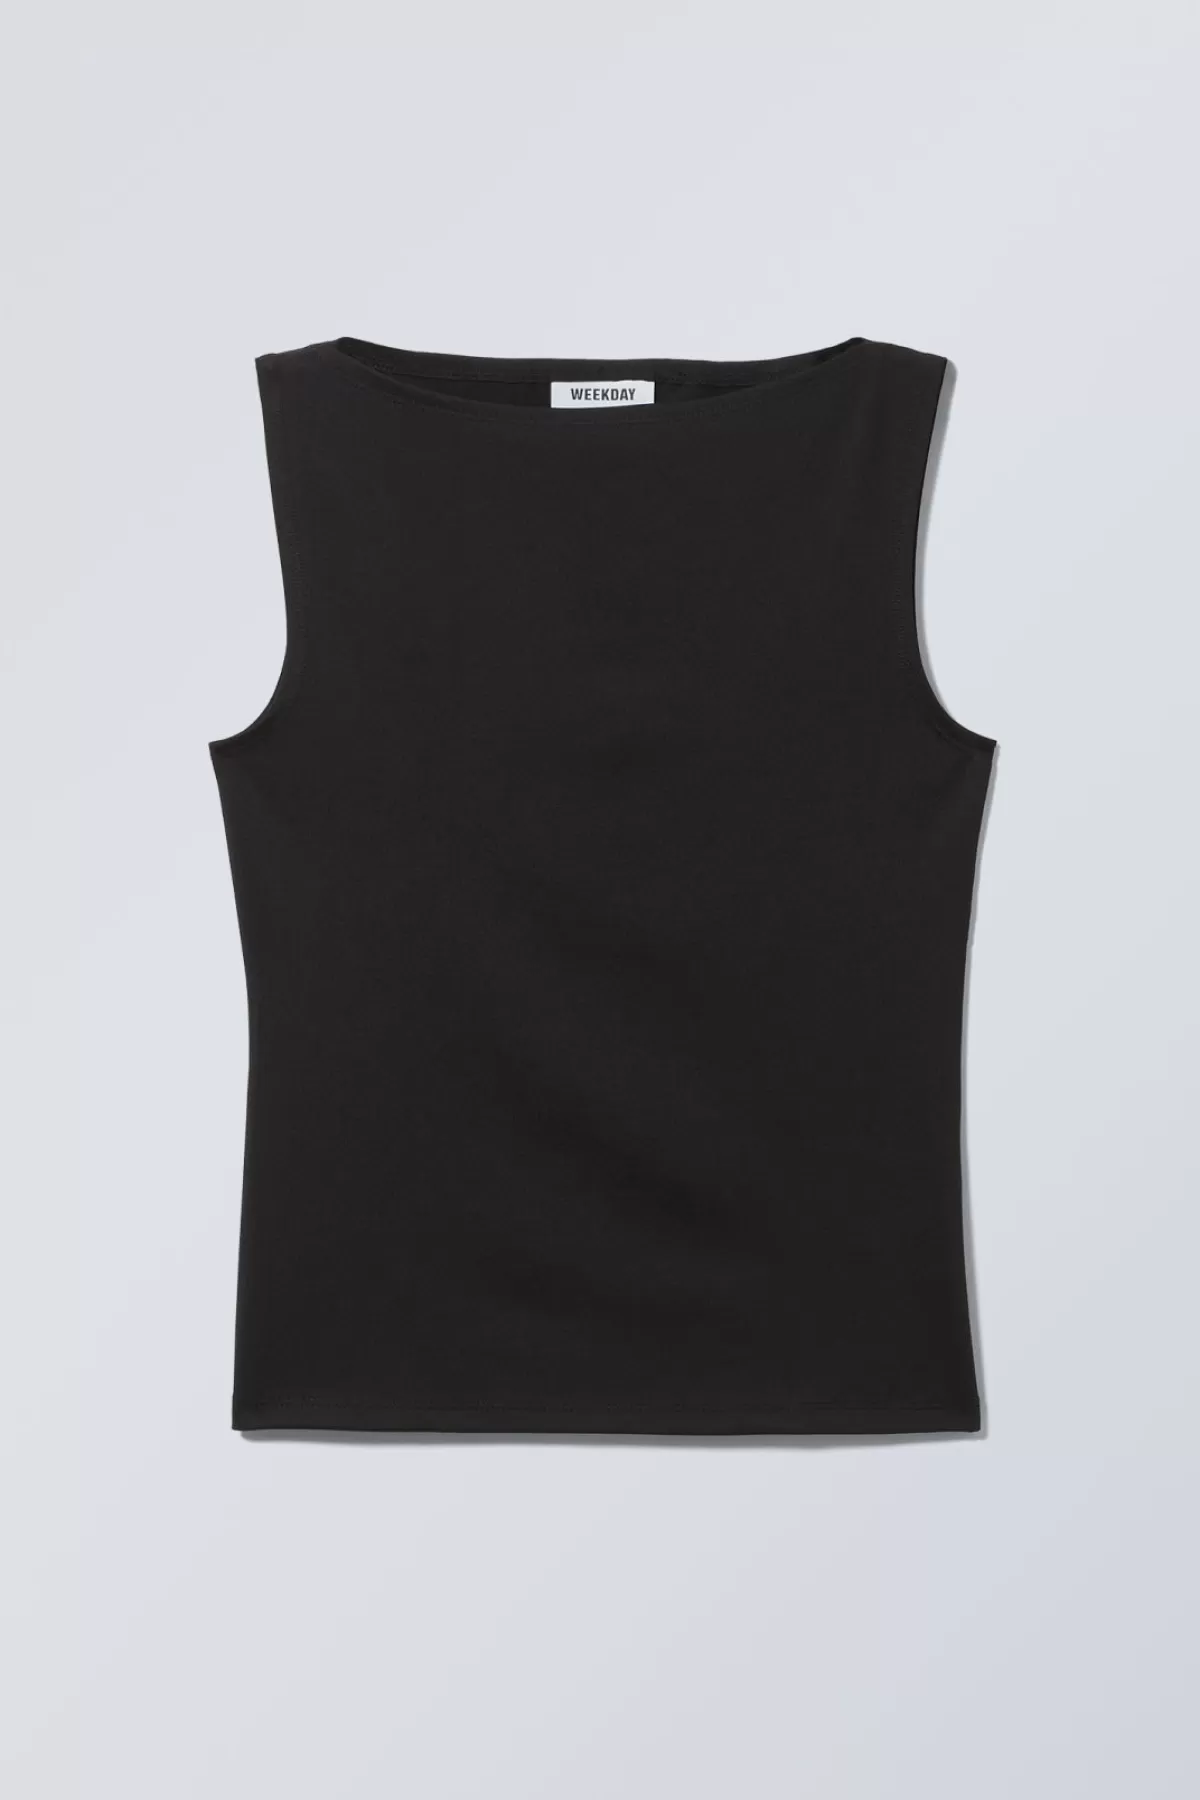 Weekday Annie Boatneck Sleeveless Top Black Outlet